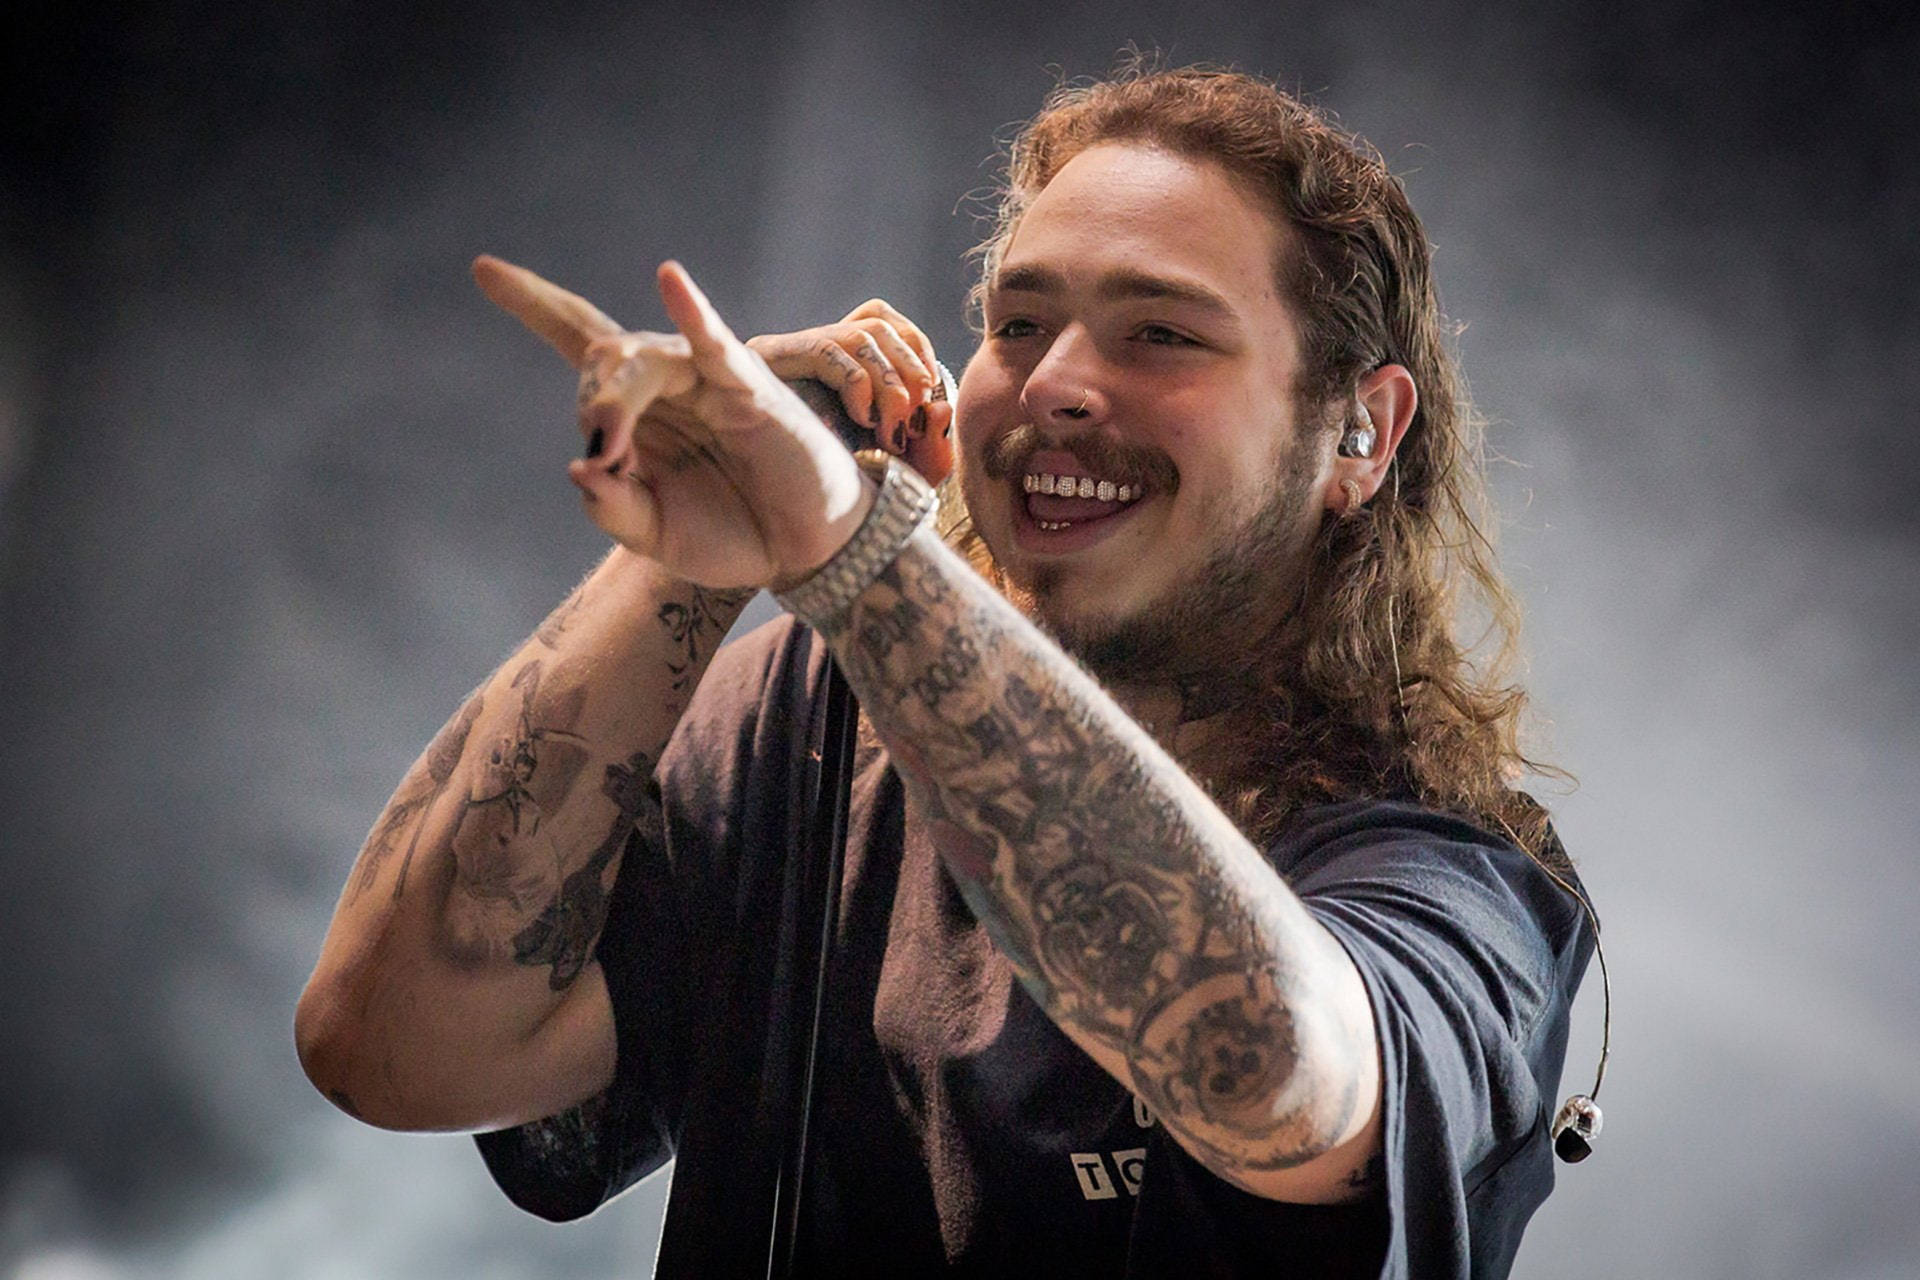 Post Malone wearing a black shirt while holding a mic